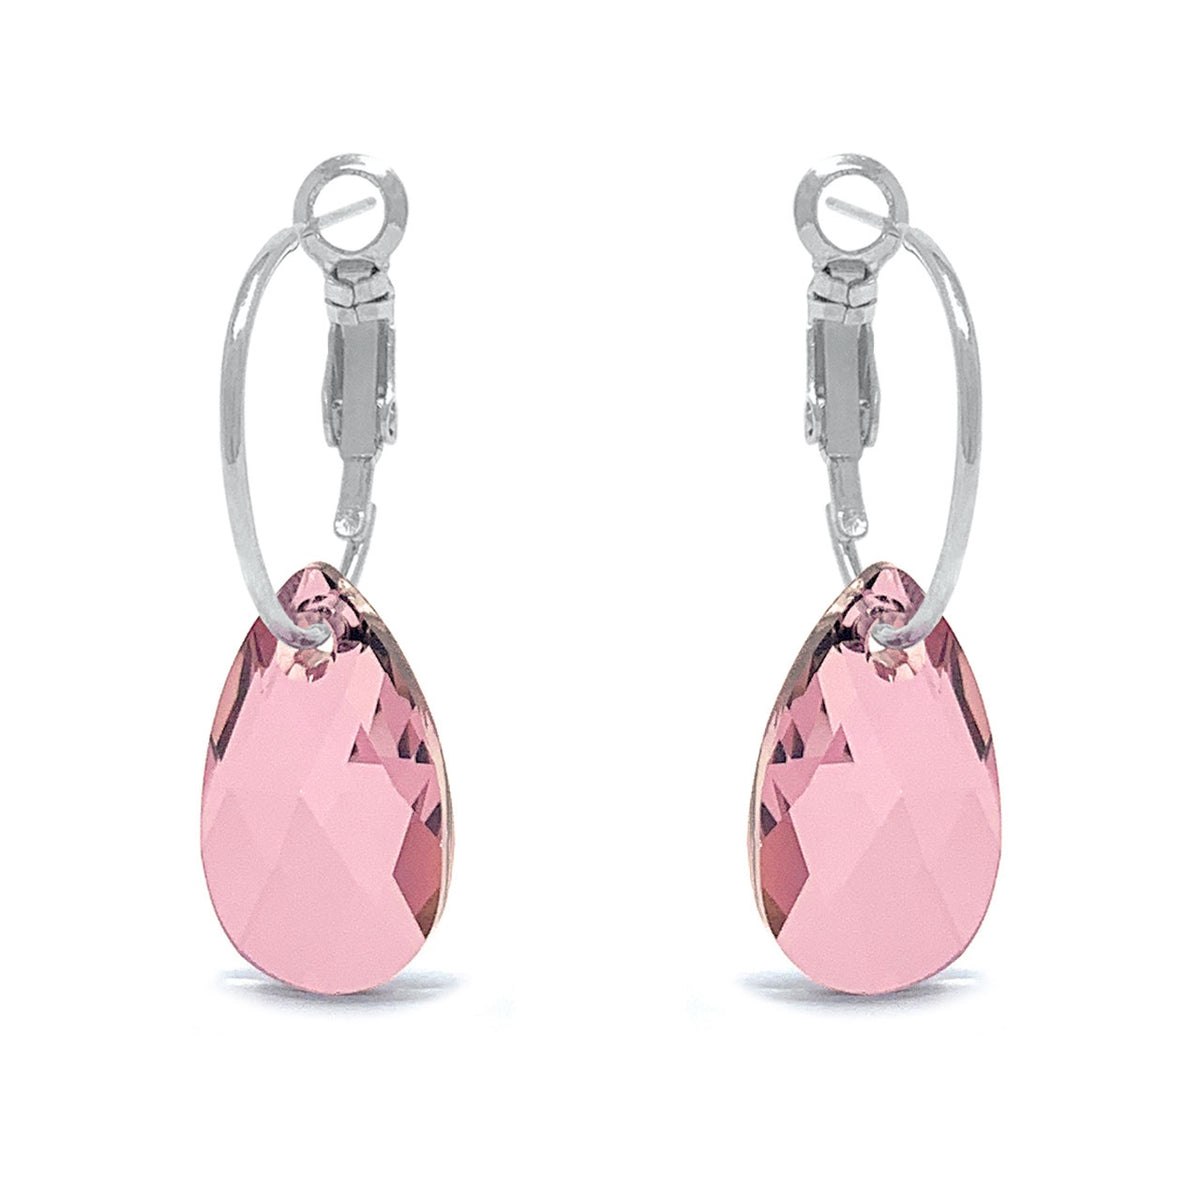 Aurora Small Drop Earrings with Beige Antique Pink Pear Crystals from Swarovski Silver Toned Rhodium Plated - Ed Heart